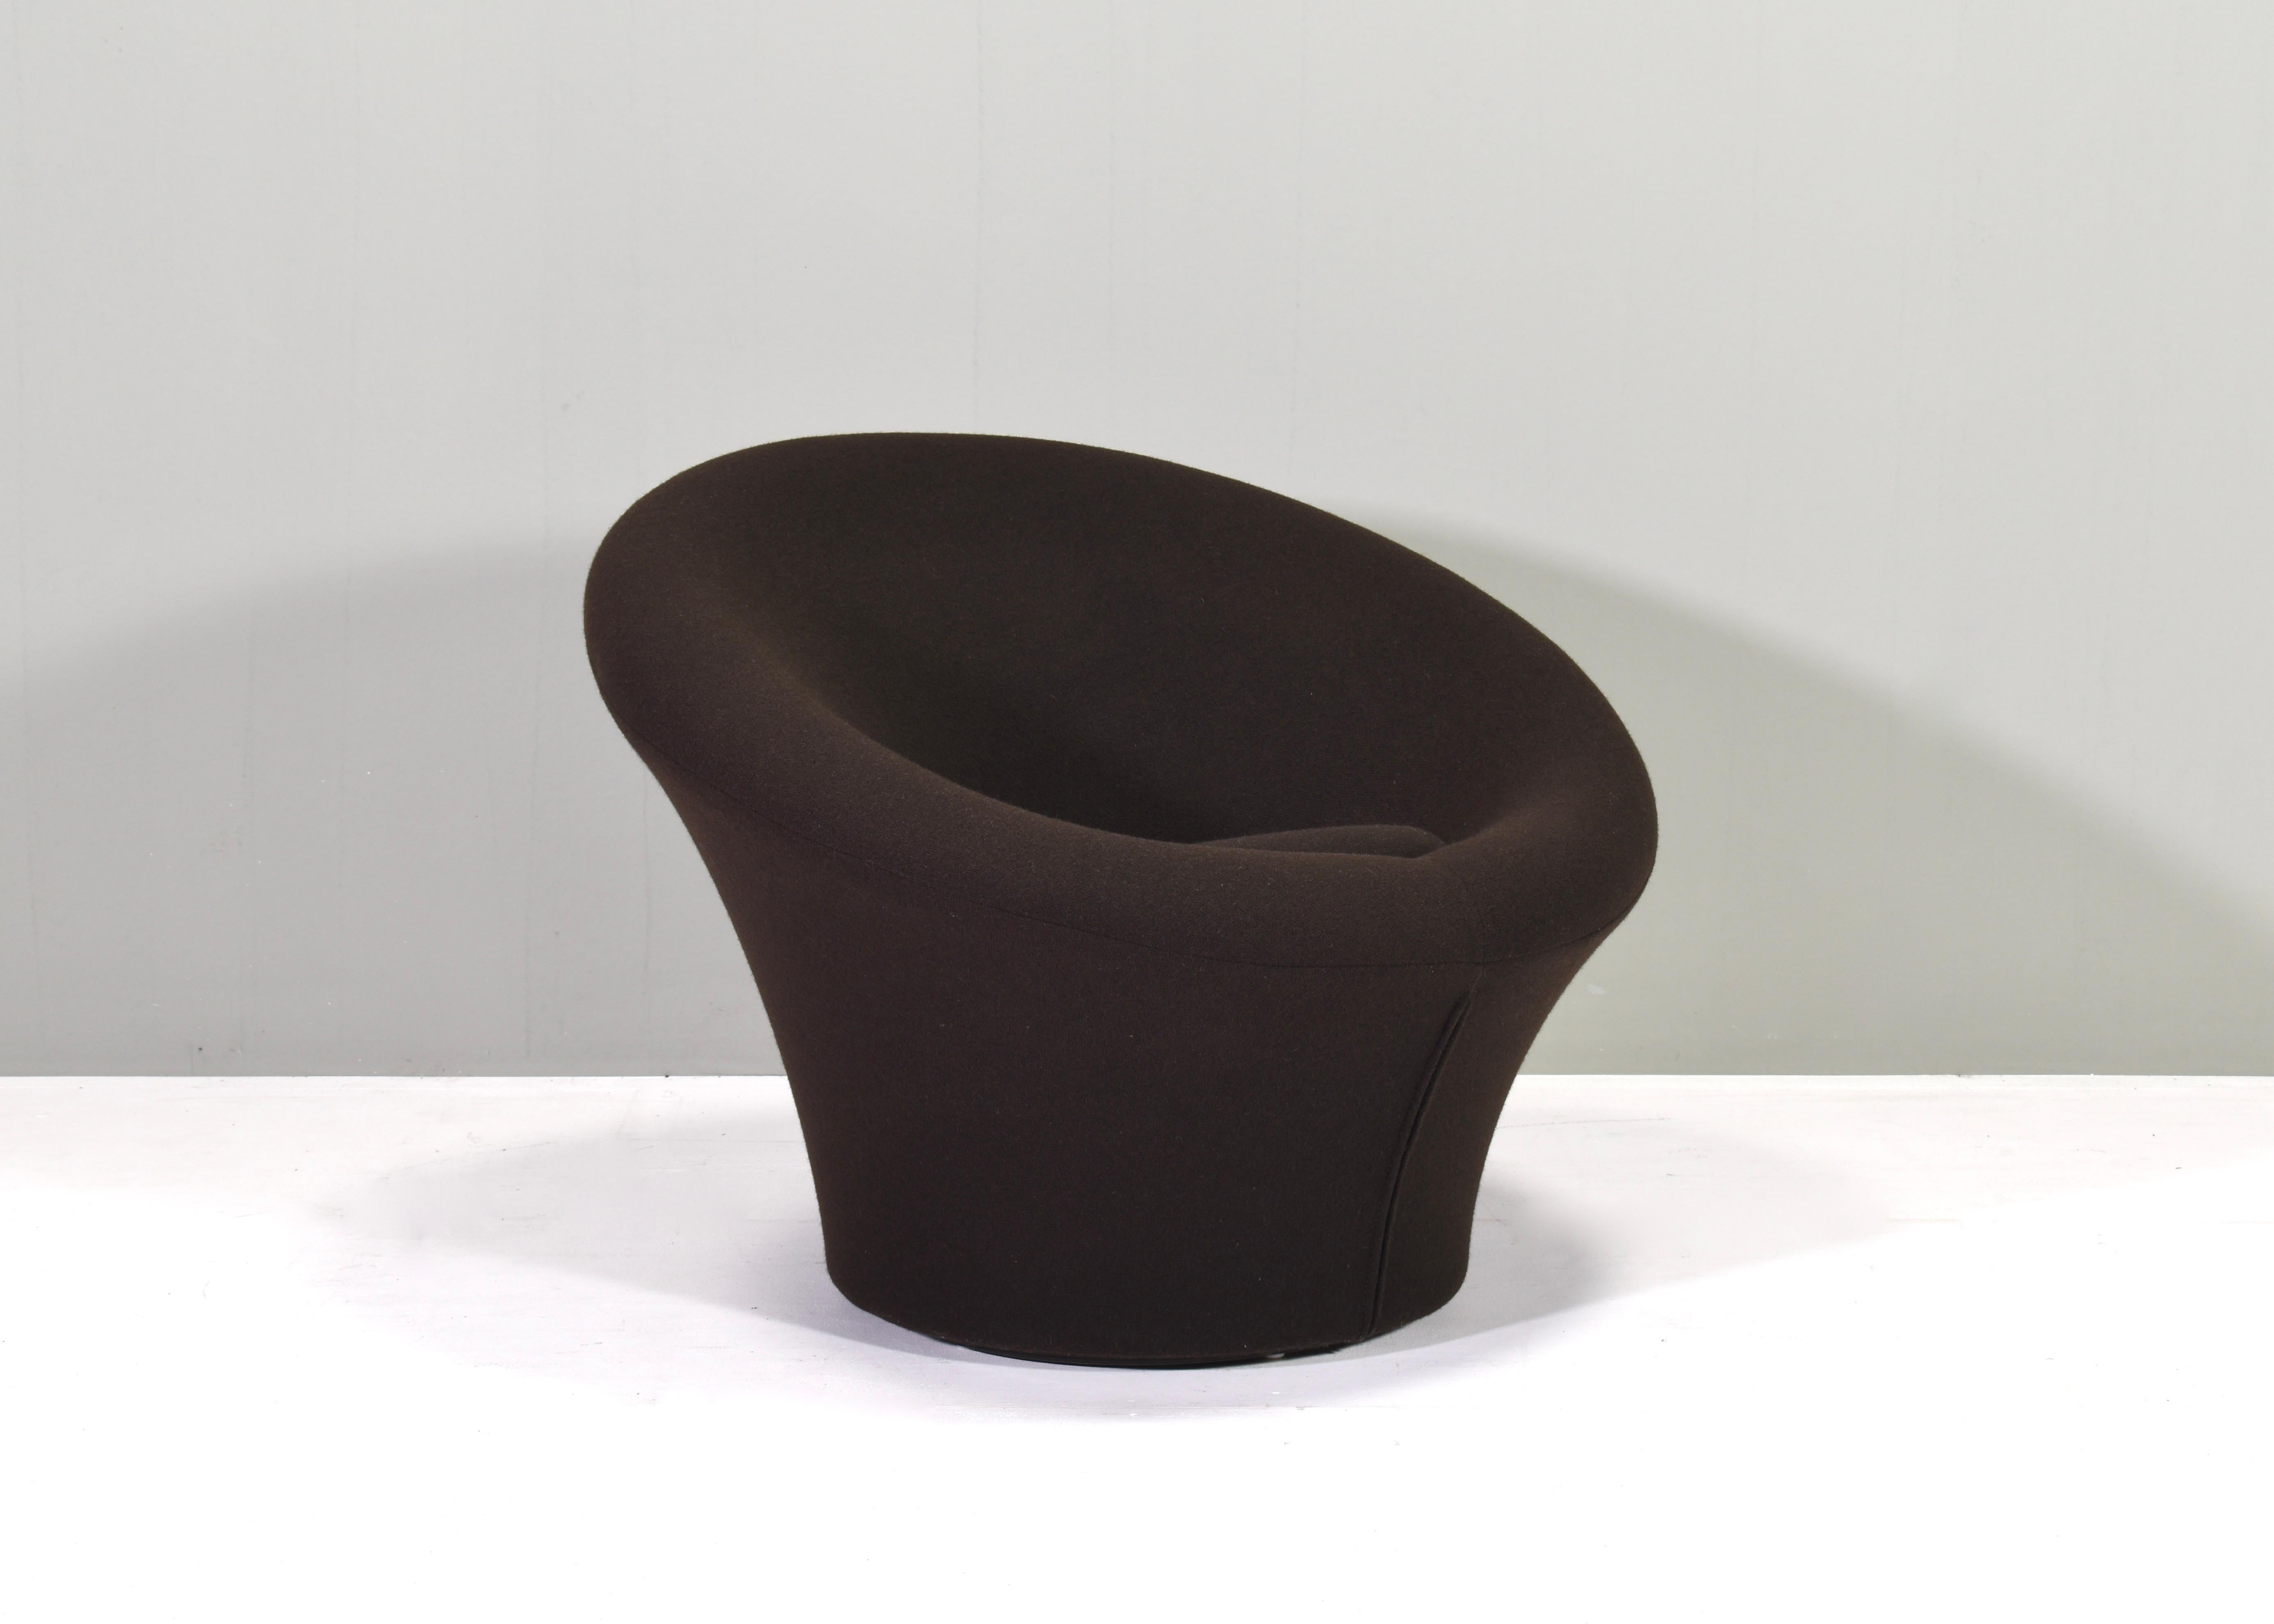 Mushroom f-560 lounge chair by Pierre Paulin for Artifort, Netherlands – circa 1970.
The chair is made in a very dark brown (almost black) wool fabric by Kvadrat. The condition of the chair is original and excellent.

We also have an ottoman